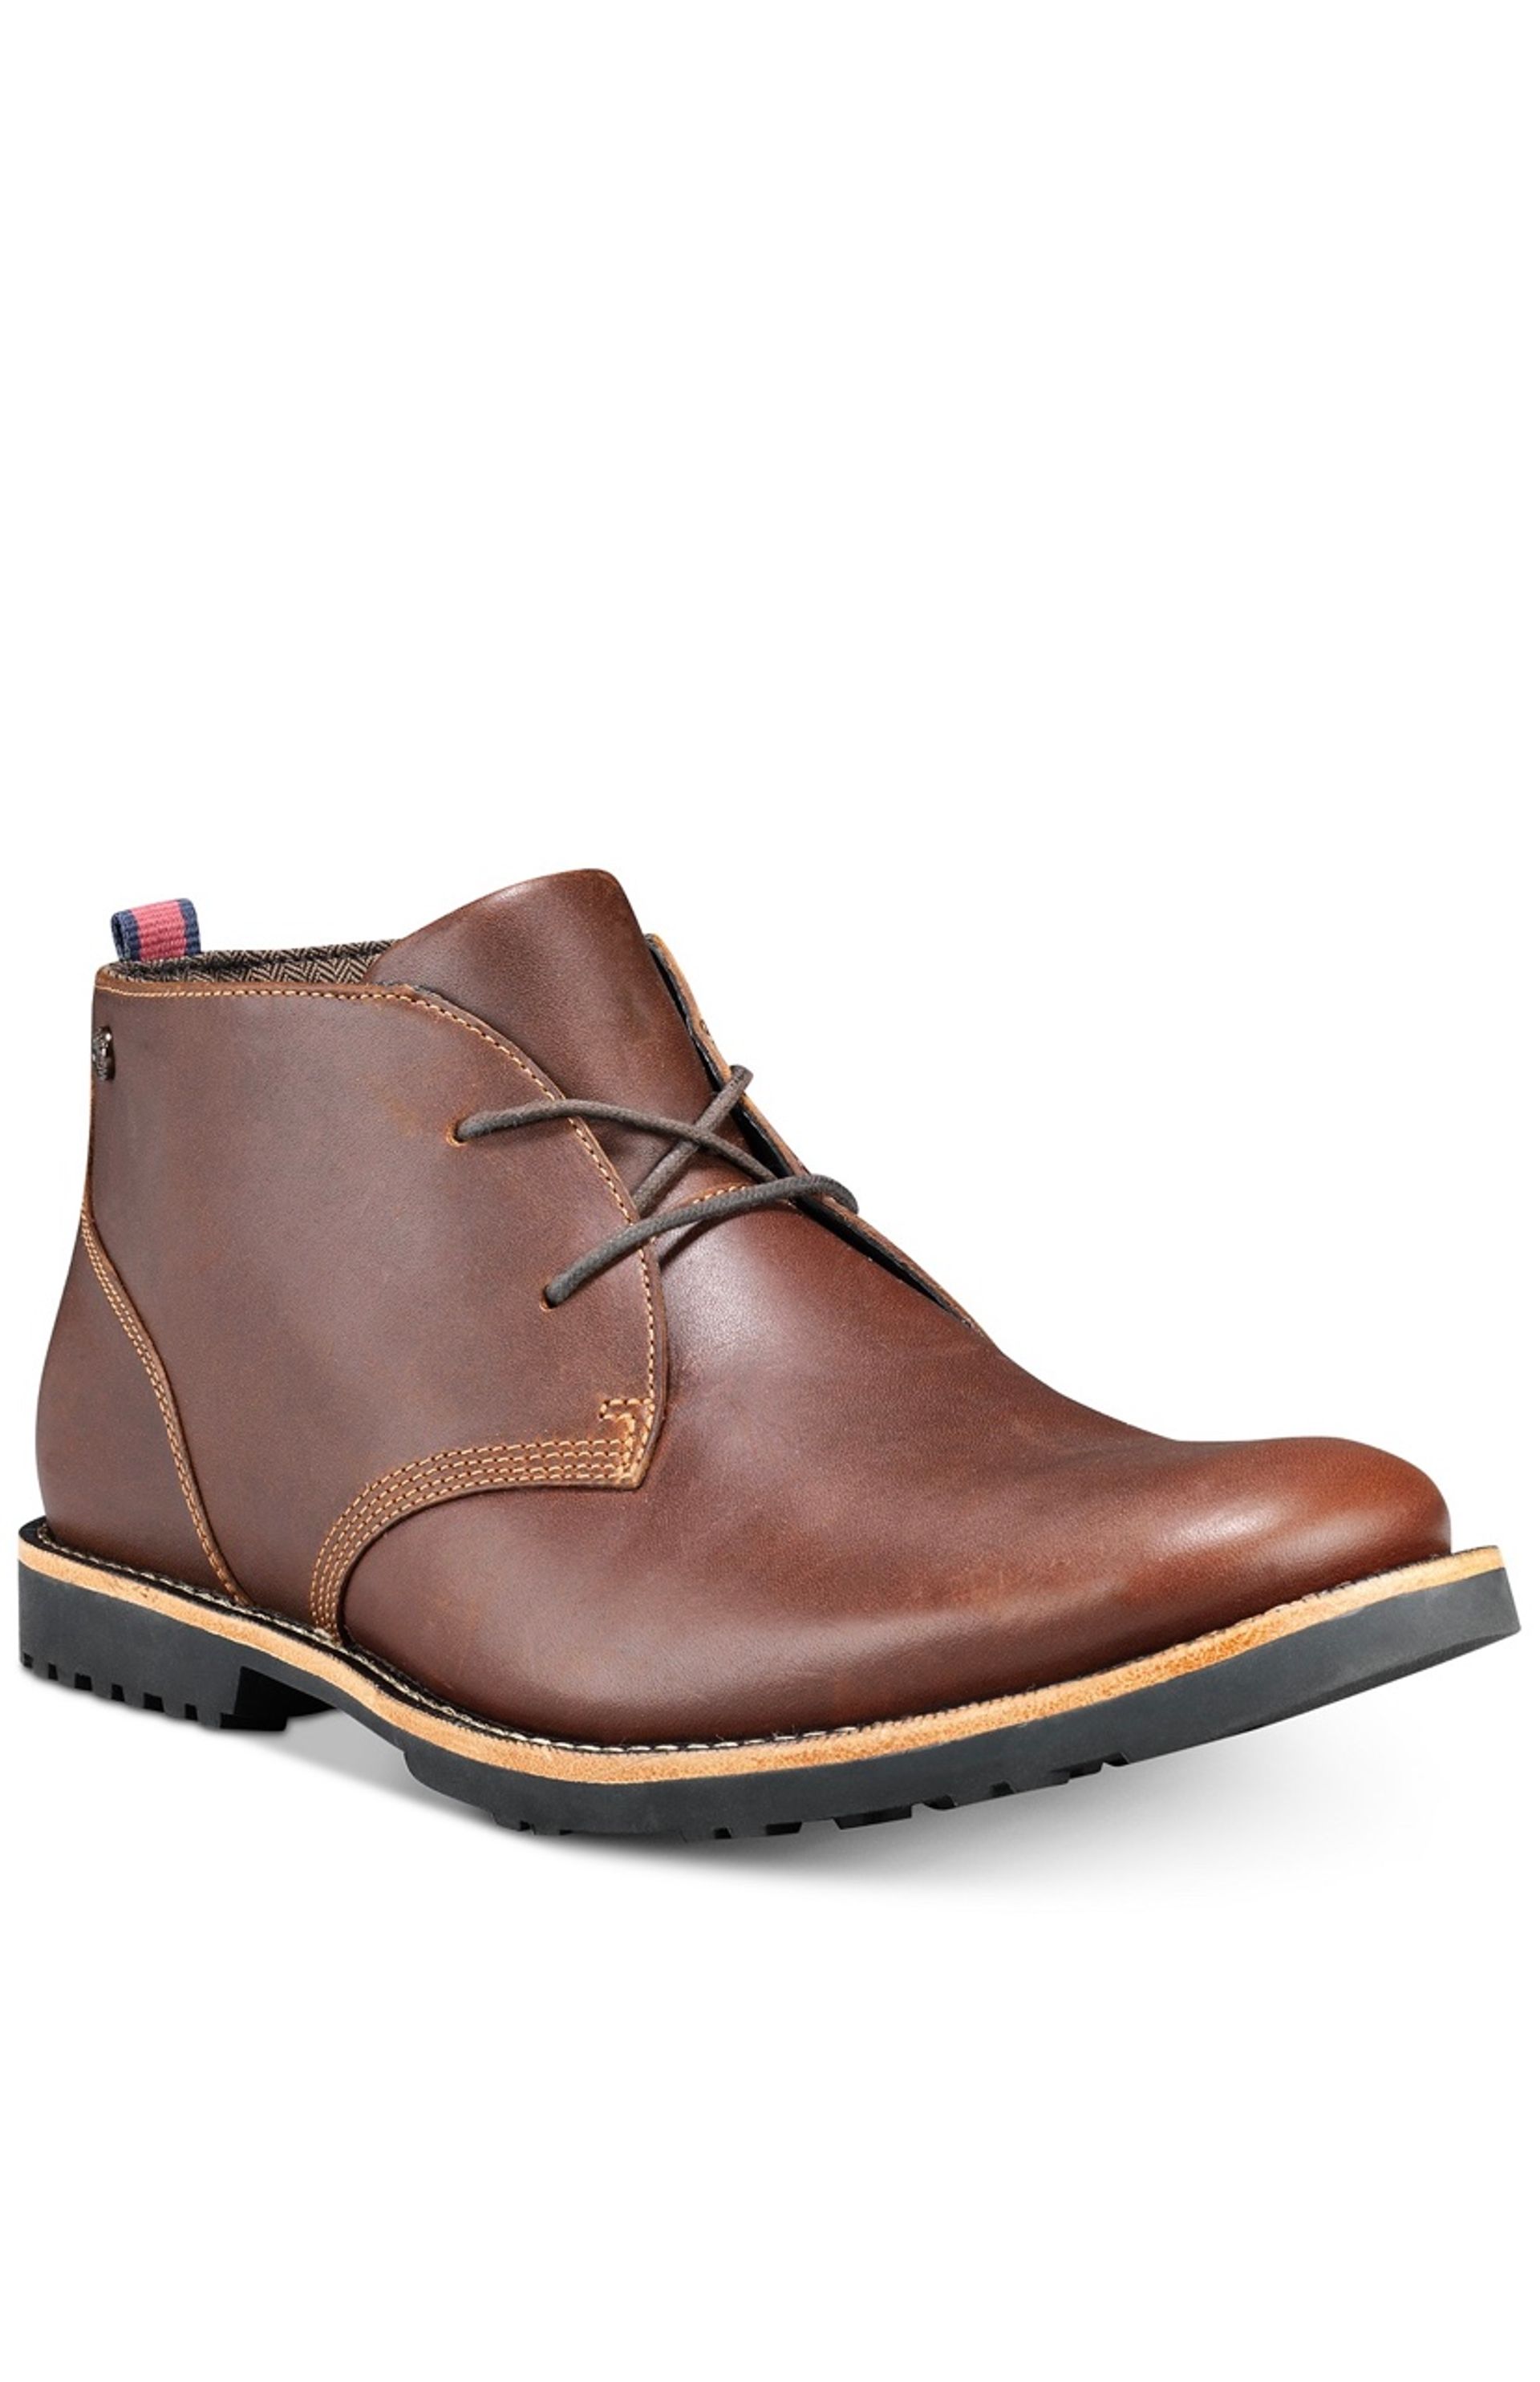 Richdale Leather Chukka Boots 